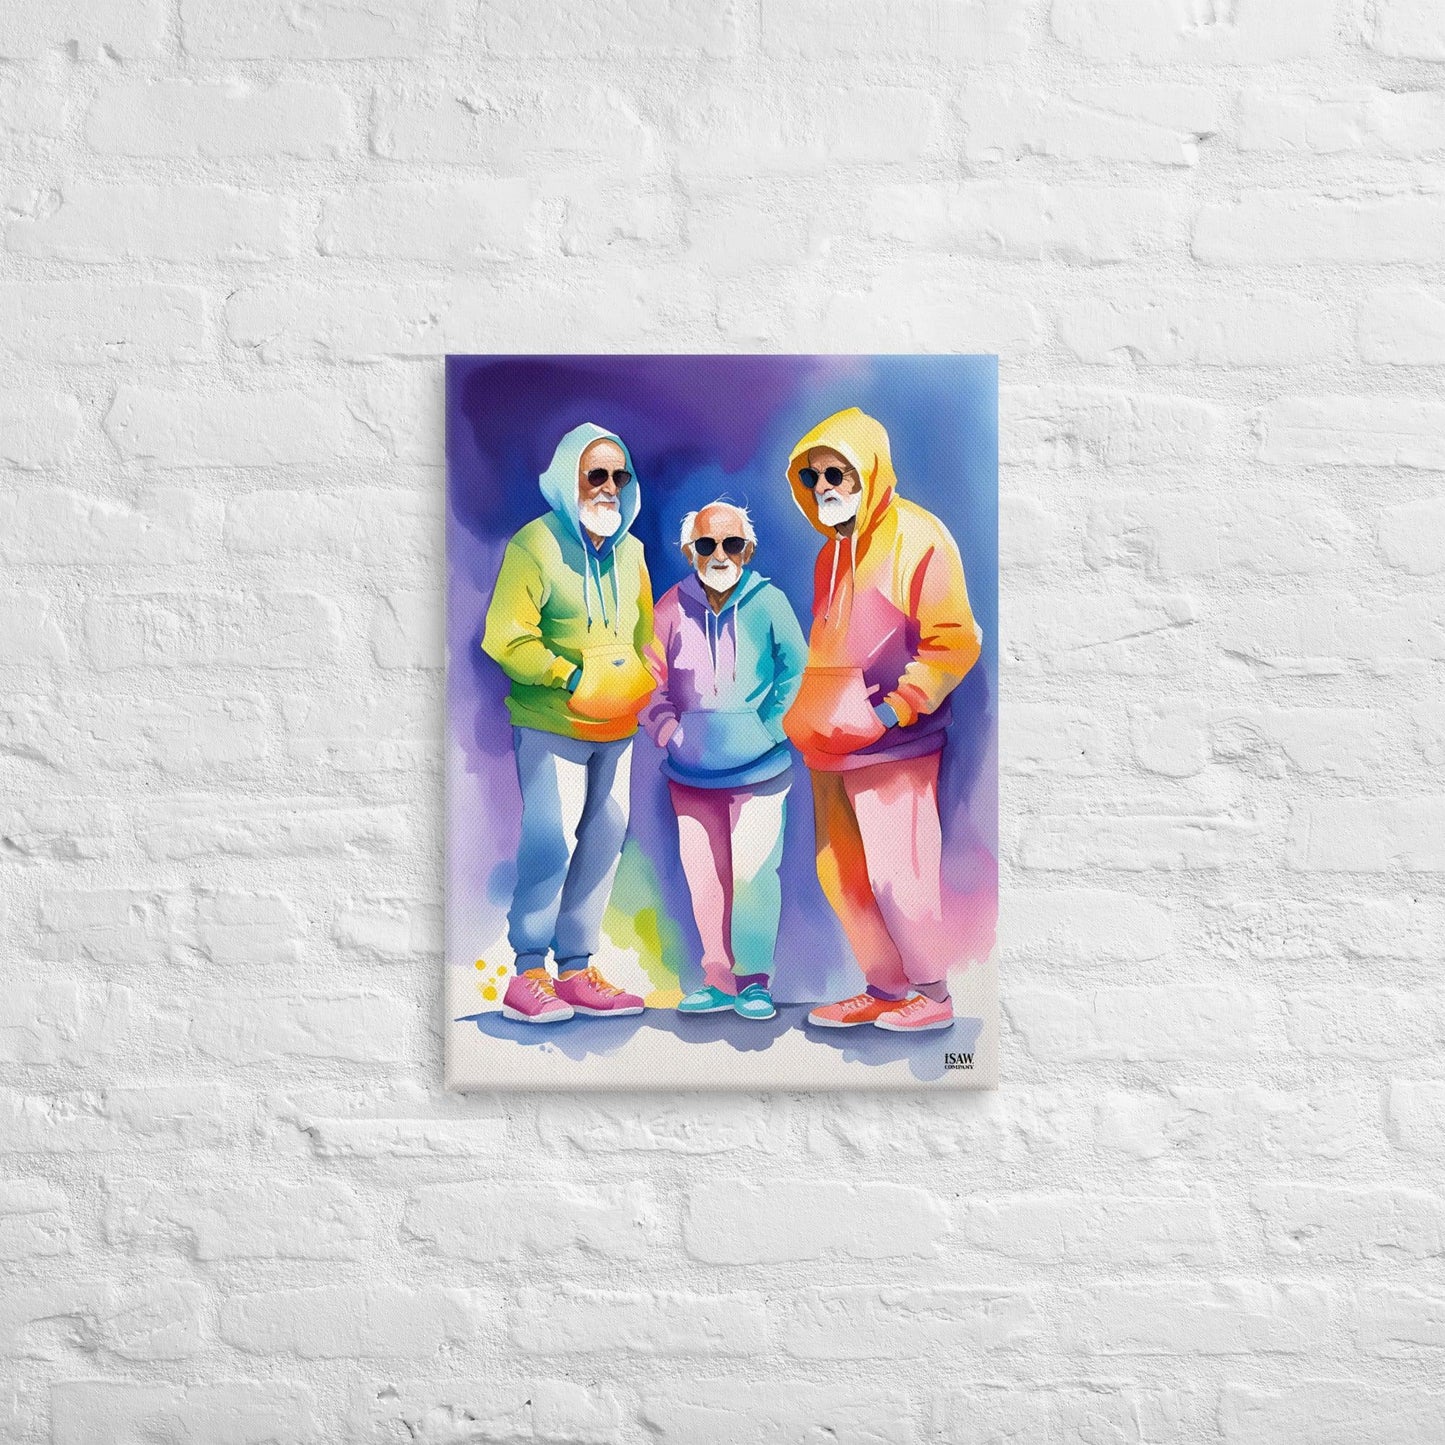 Hoodies And The O.G V3 - Canvas Print - iSAW Company